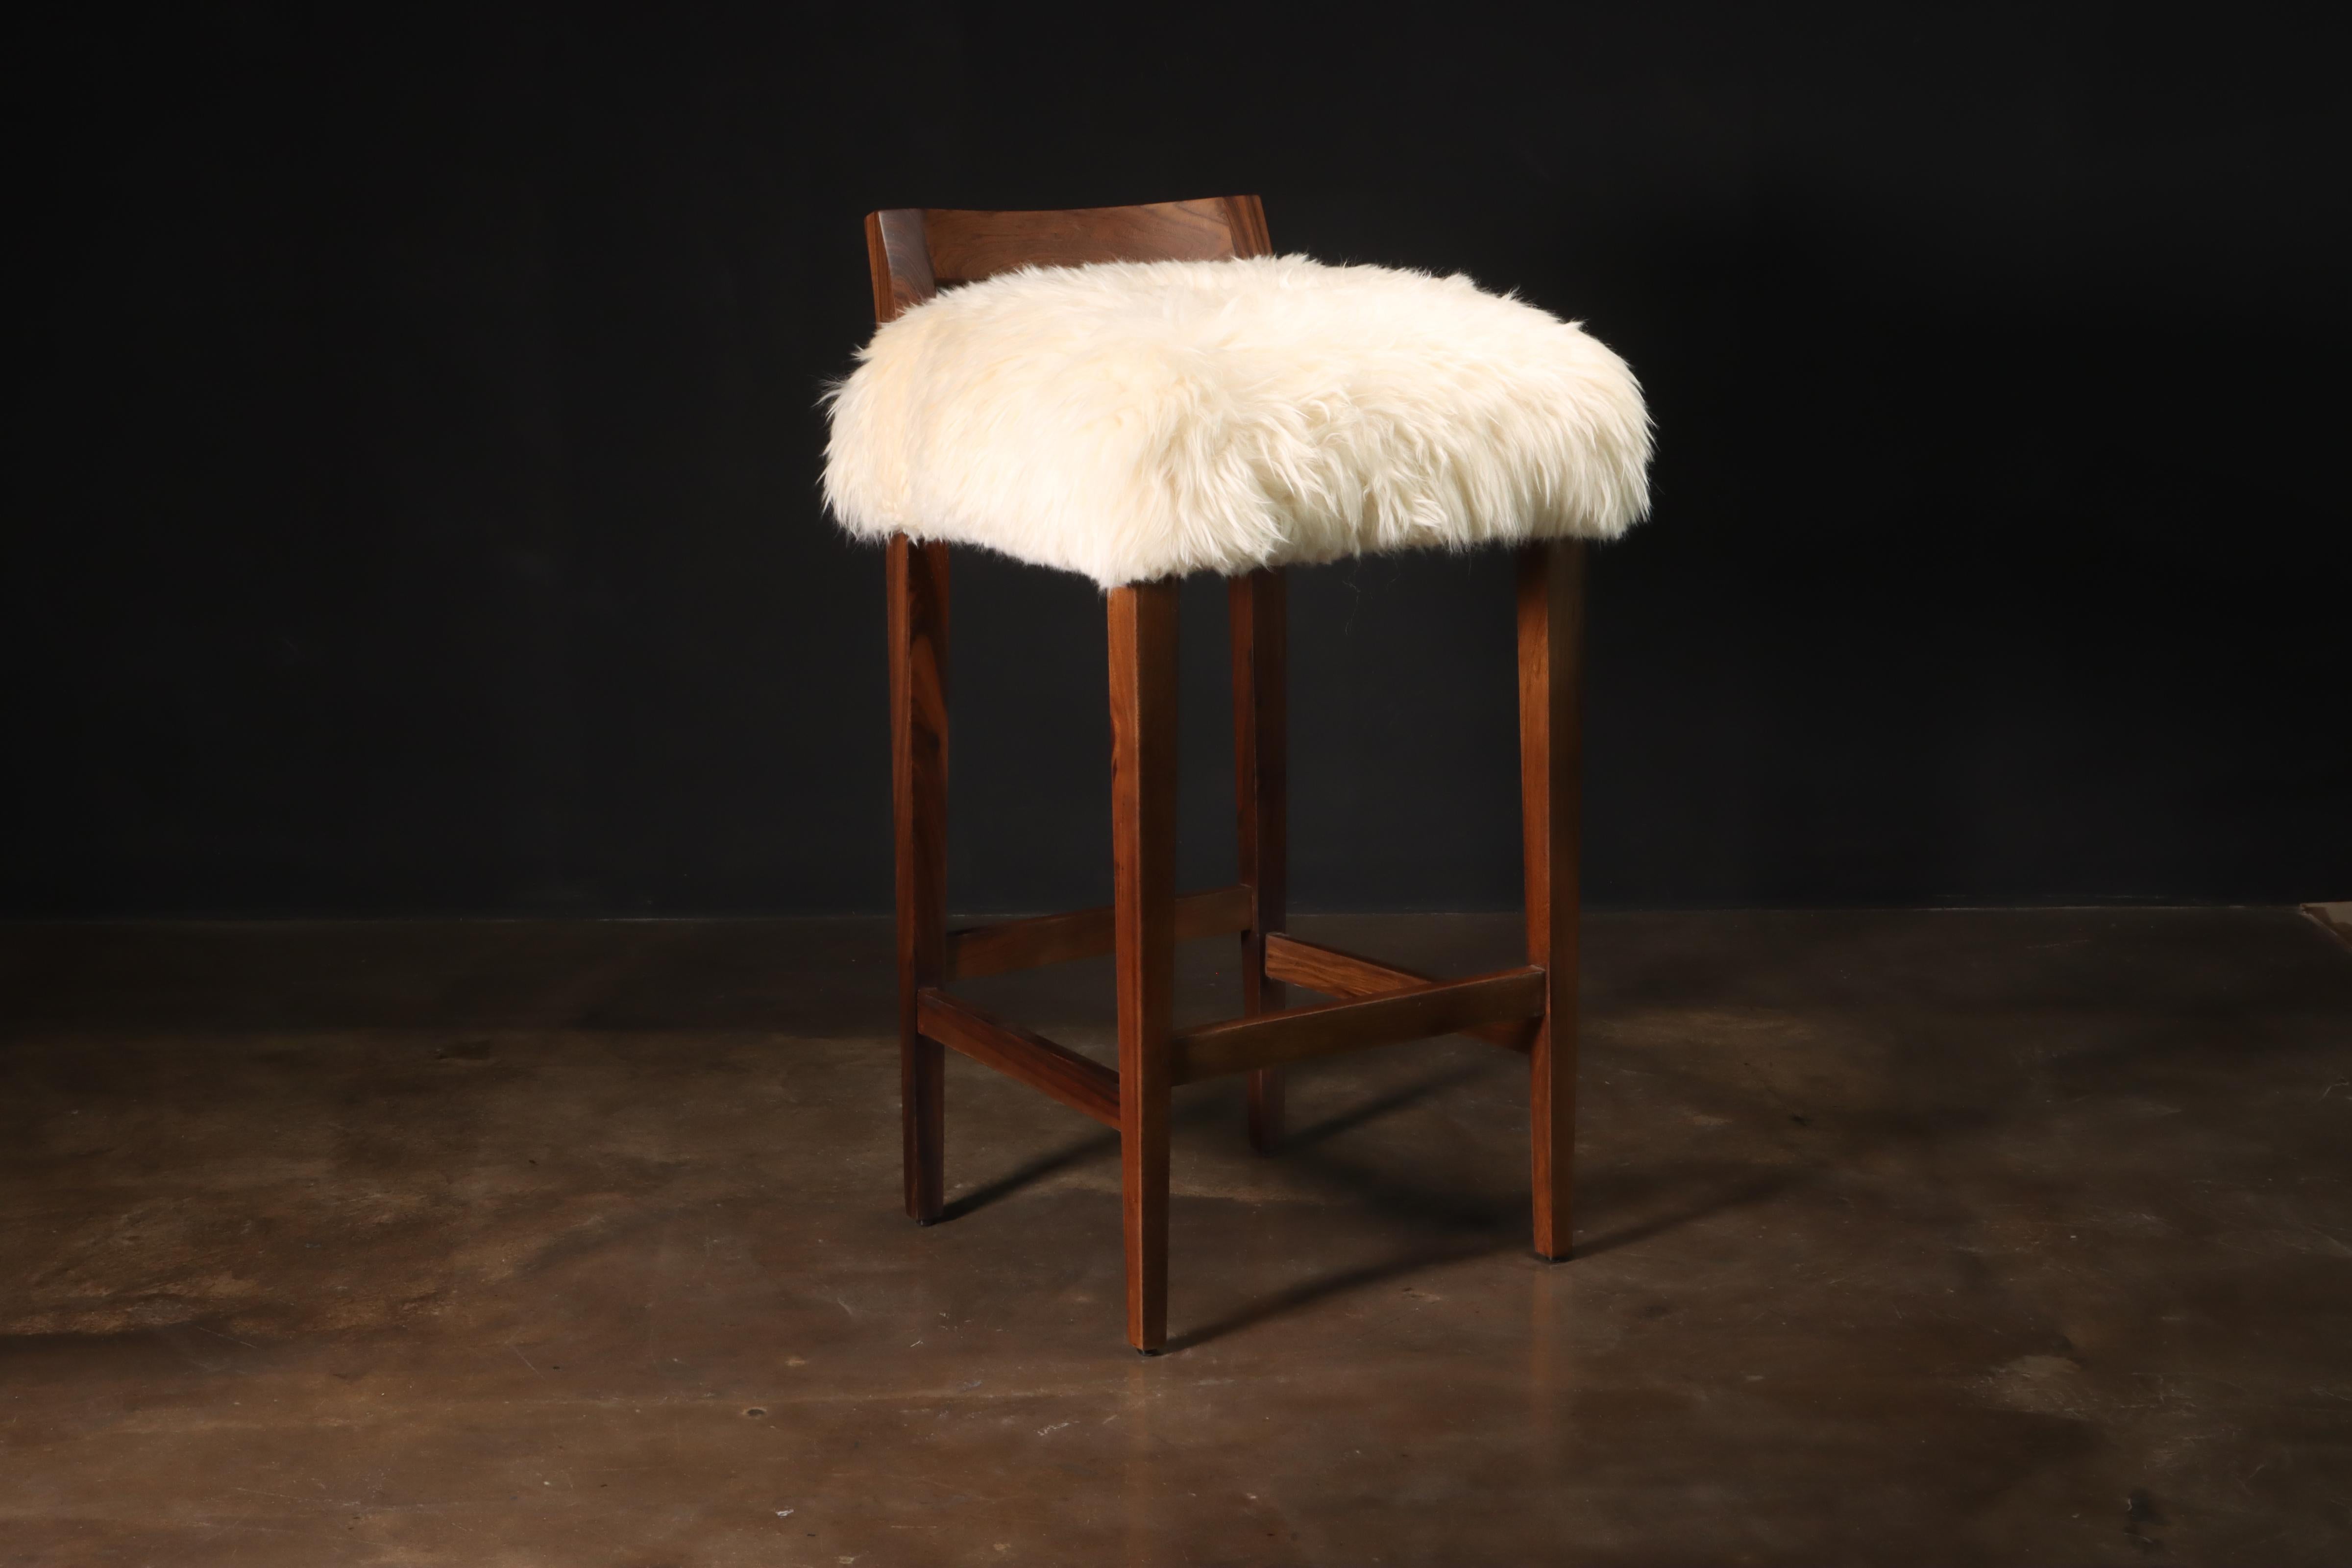 Sheepskin and Exotic Wood Contemporary low back stool from Costantini, Umberto

Measurements are 18” W, 19” D, 36” H, 30” SH as shown.

The Umberto stool is one of Costantini’s original seating designs, featuring a modern, low, carved Argentine